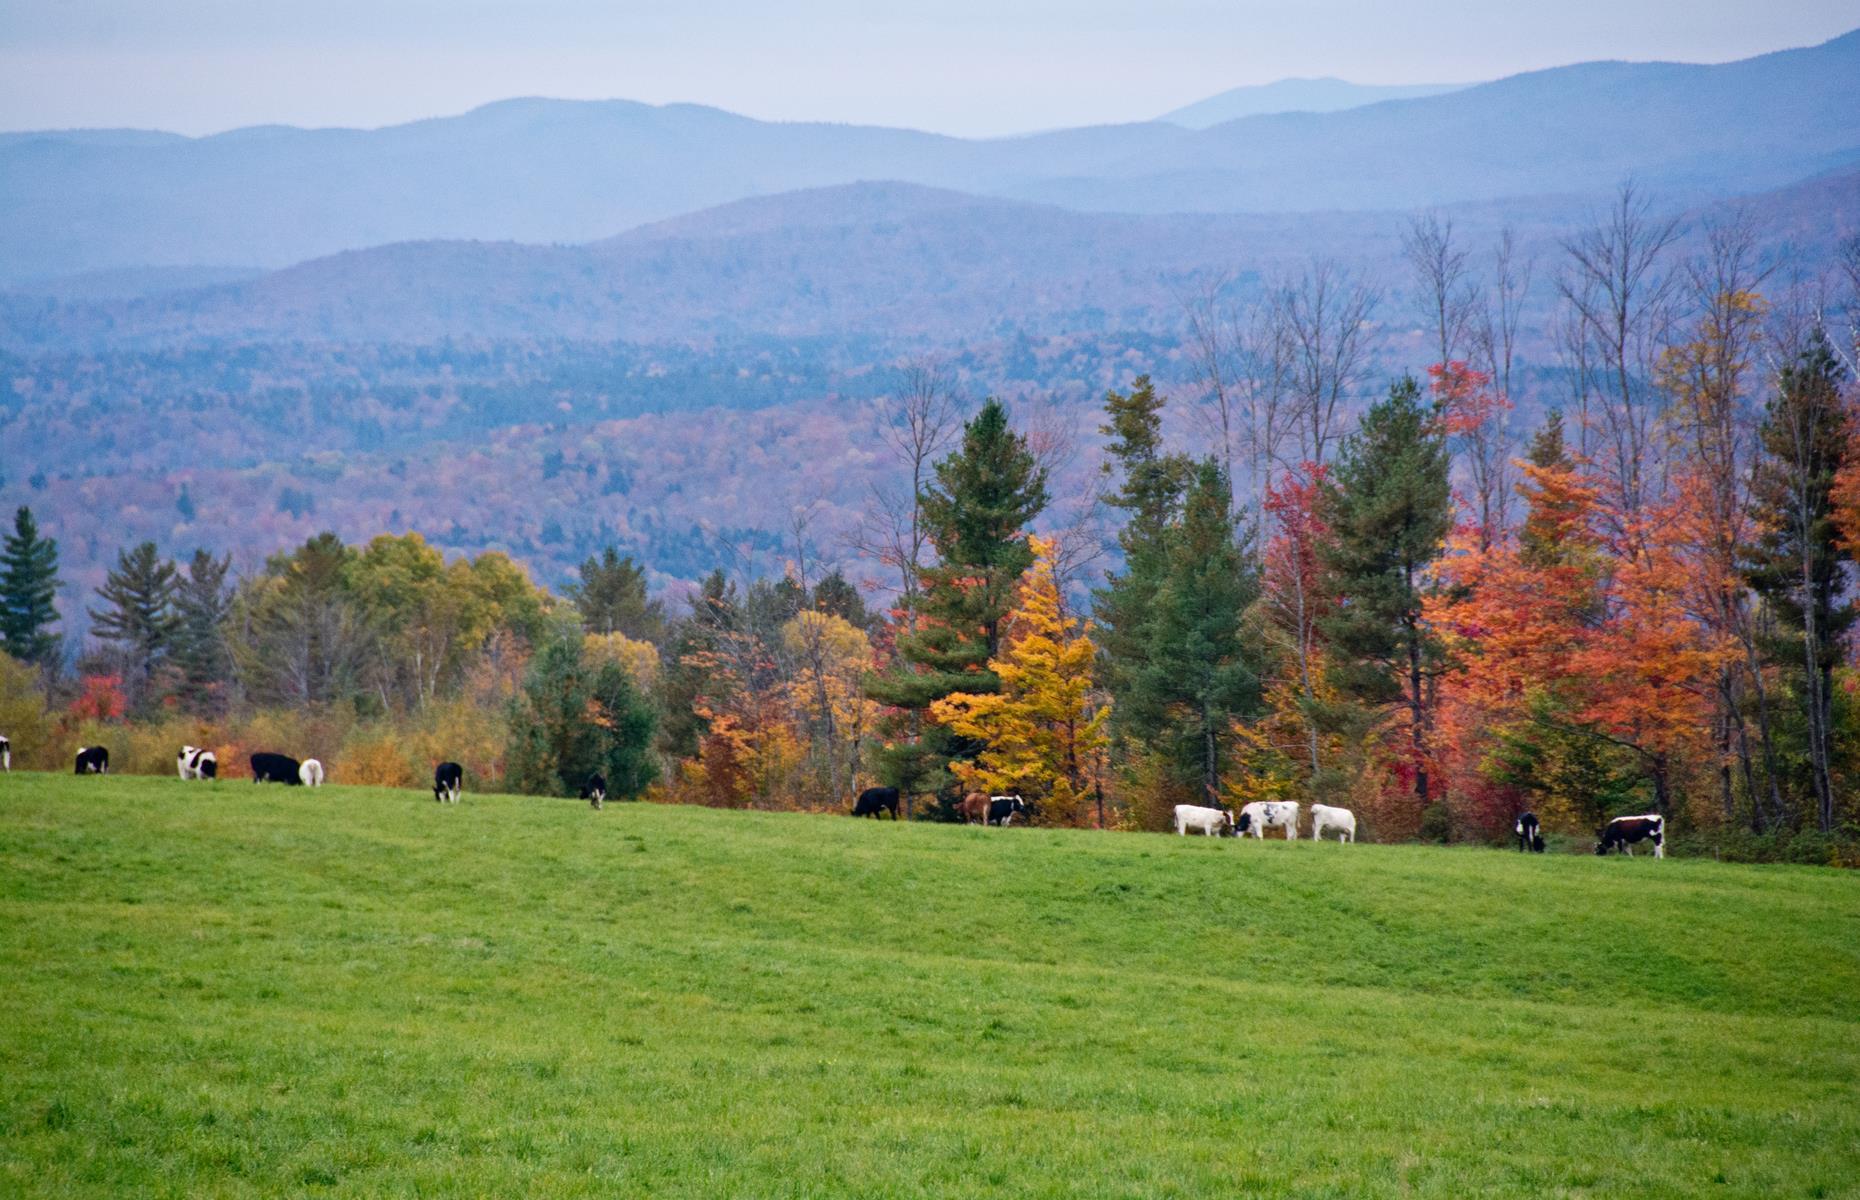 <p>If you like artisan cheese then Vermont is the state to visit – its idyllic countryside is home to more than 45 artisanal cheesemakers. And one of the best ways to explore them is by following <a href="https://www.nationalgeographic.com/travel/article/vermont-cheese-trail-road-trip">this 280-mile (450km) food odyssey</a> from Plymouth Notch to Websterville. Be sure to leave room in your trunk to stock up on produce along the way.</p>